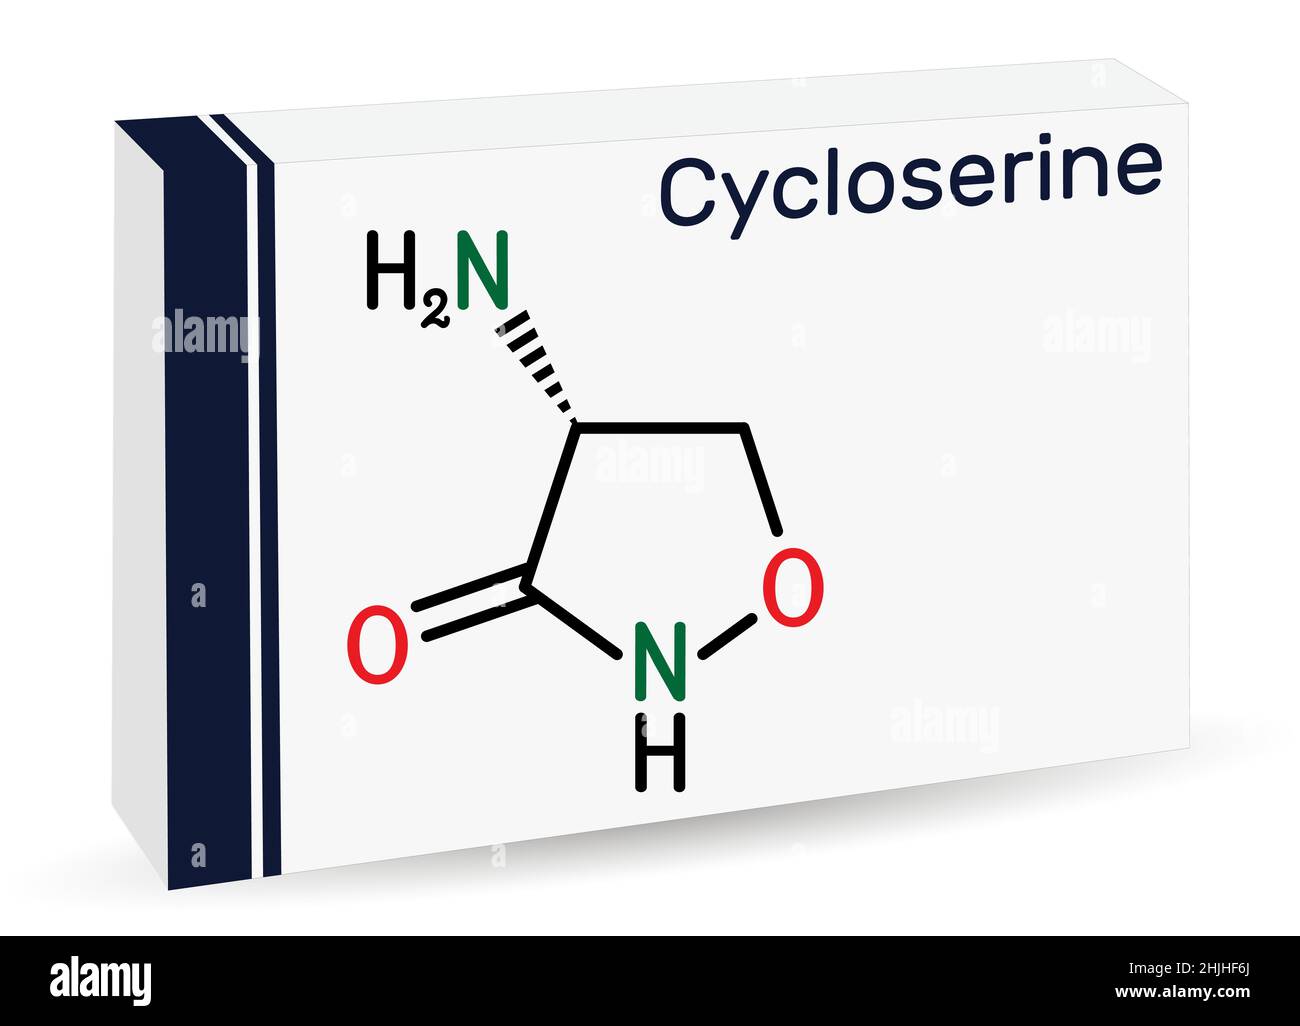 Cycloserine molecule. It is broad-spectrum antibiotic used in the treatment of tuberculosis and certain urinary tract infections (UTI). Skeletal chemi Stock Vector